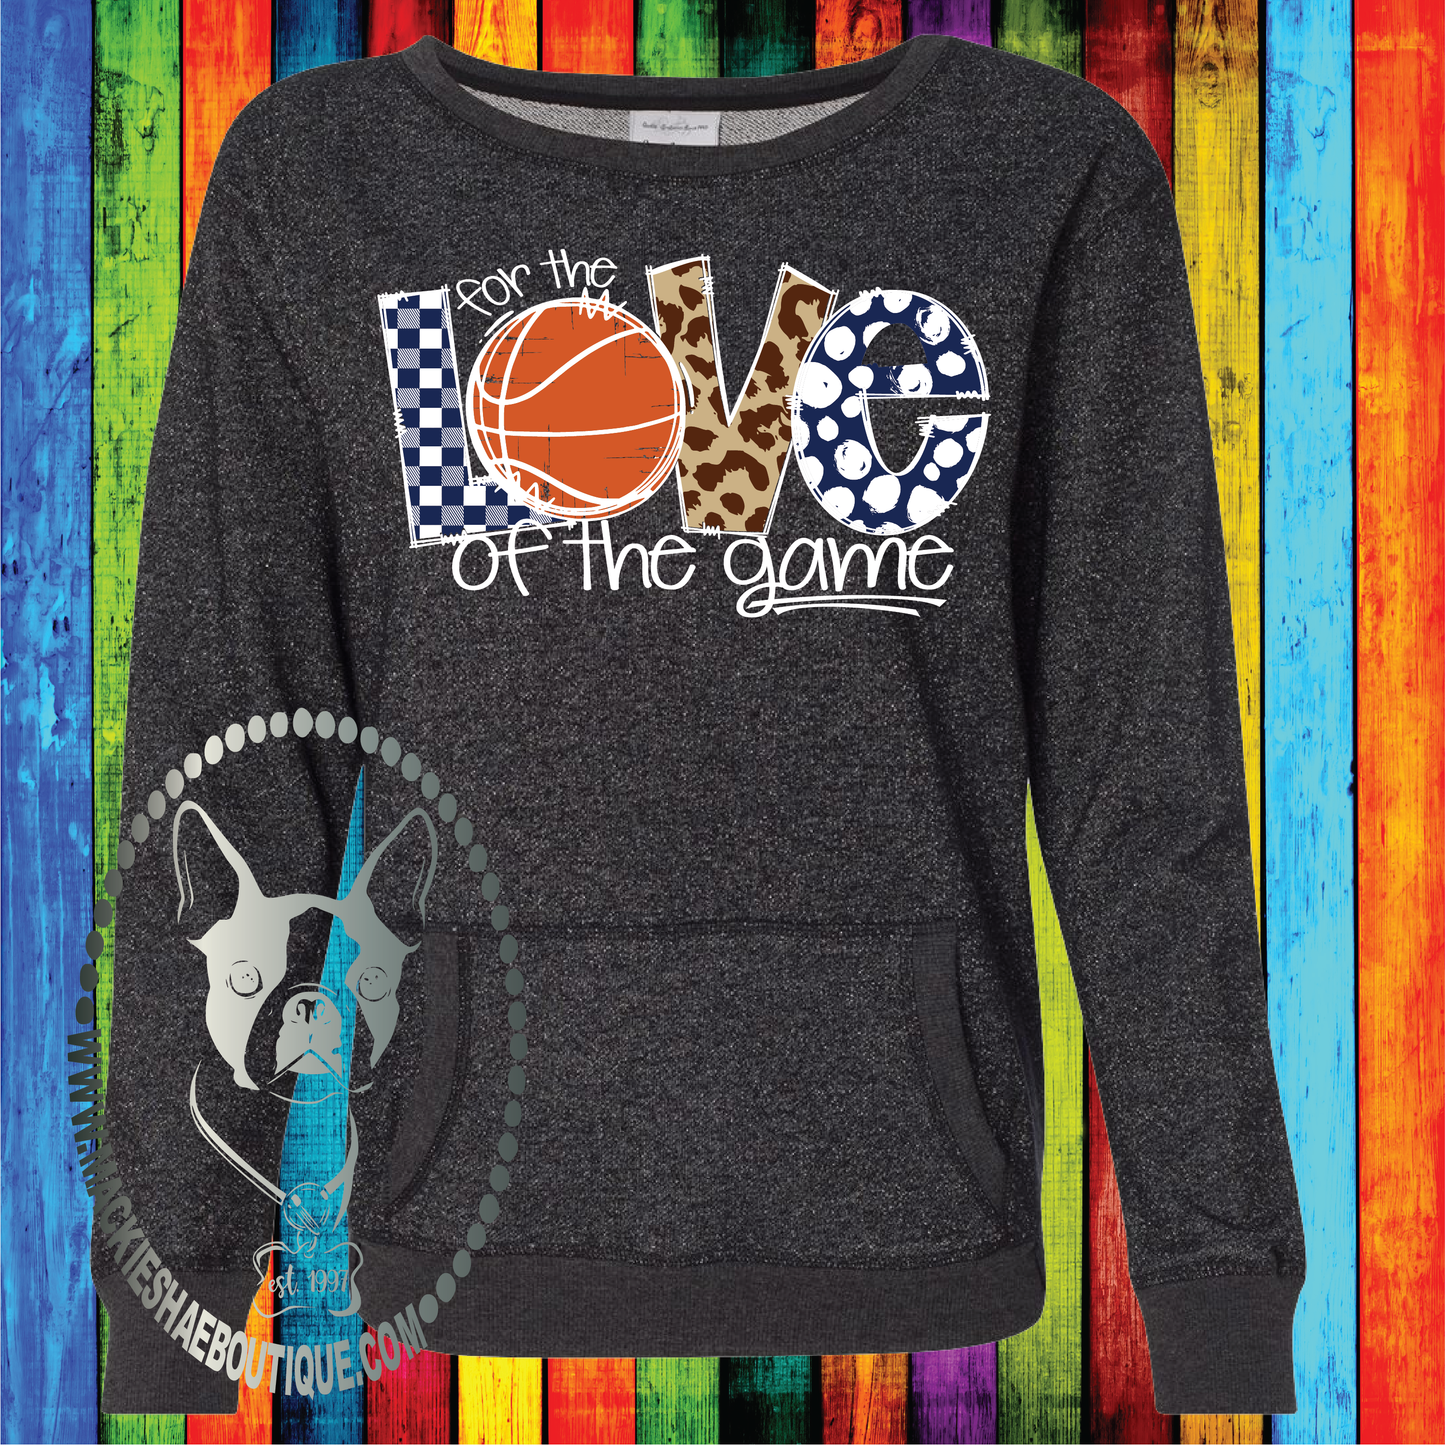 For the Love of the Game, Basketball (Color and Pattern Options) Custom Shirt, Glitter Sweatshirt